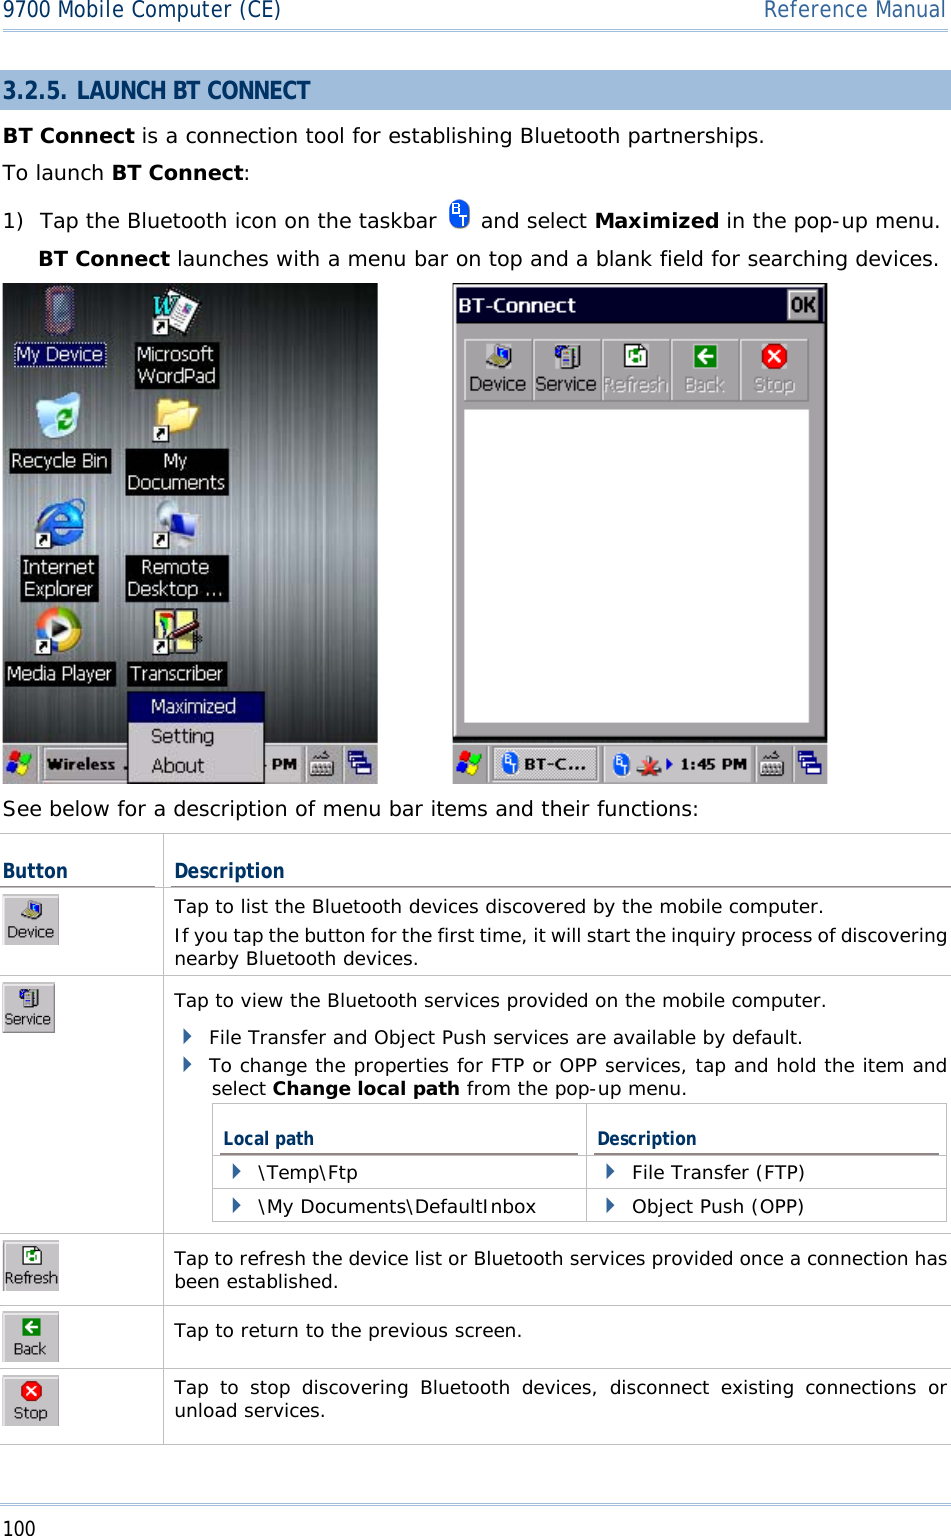 1009700 Mobile Computer (CE)  Reference Manual3.2.5. LAUNCH BT CONNECT BT Connect is a connection tool for establishing Bluetooth partnerships.  To launch BT Connect:1) Tap the Bluetooth icon on the taskbar   and select Maximized in the pop-up menu.  BT Connect launches with a menu bar on top and a blank field for searching devices. See below for a description of menu bar items and their functions: Button DescriptionTap to list the Bluetooth devices discovered by the mobile computer. If you tap the button for the first time, it will start the inquiry process of discovering nearby Bluetooth devices. Tap to view the Bluetooth services provided on the mobile computer. File Transfer and Object Push services are available by default. To change the properties for FTP or OPP services, tap and hold the item and select Change local path from the pop-up menu.  Local path  Description \Temp\Ftp  File Transfer (FTP) \My Documents\DefaultInbox  Object Push (OPP) Tap to refresh the device list or Bluetooth services provided once a connection has been established. Tap to return to the previous screen. Tap to stop discovering Bluetooth devices, disconnect existing connections or unload services. 